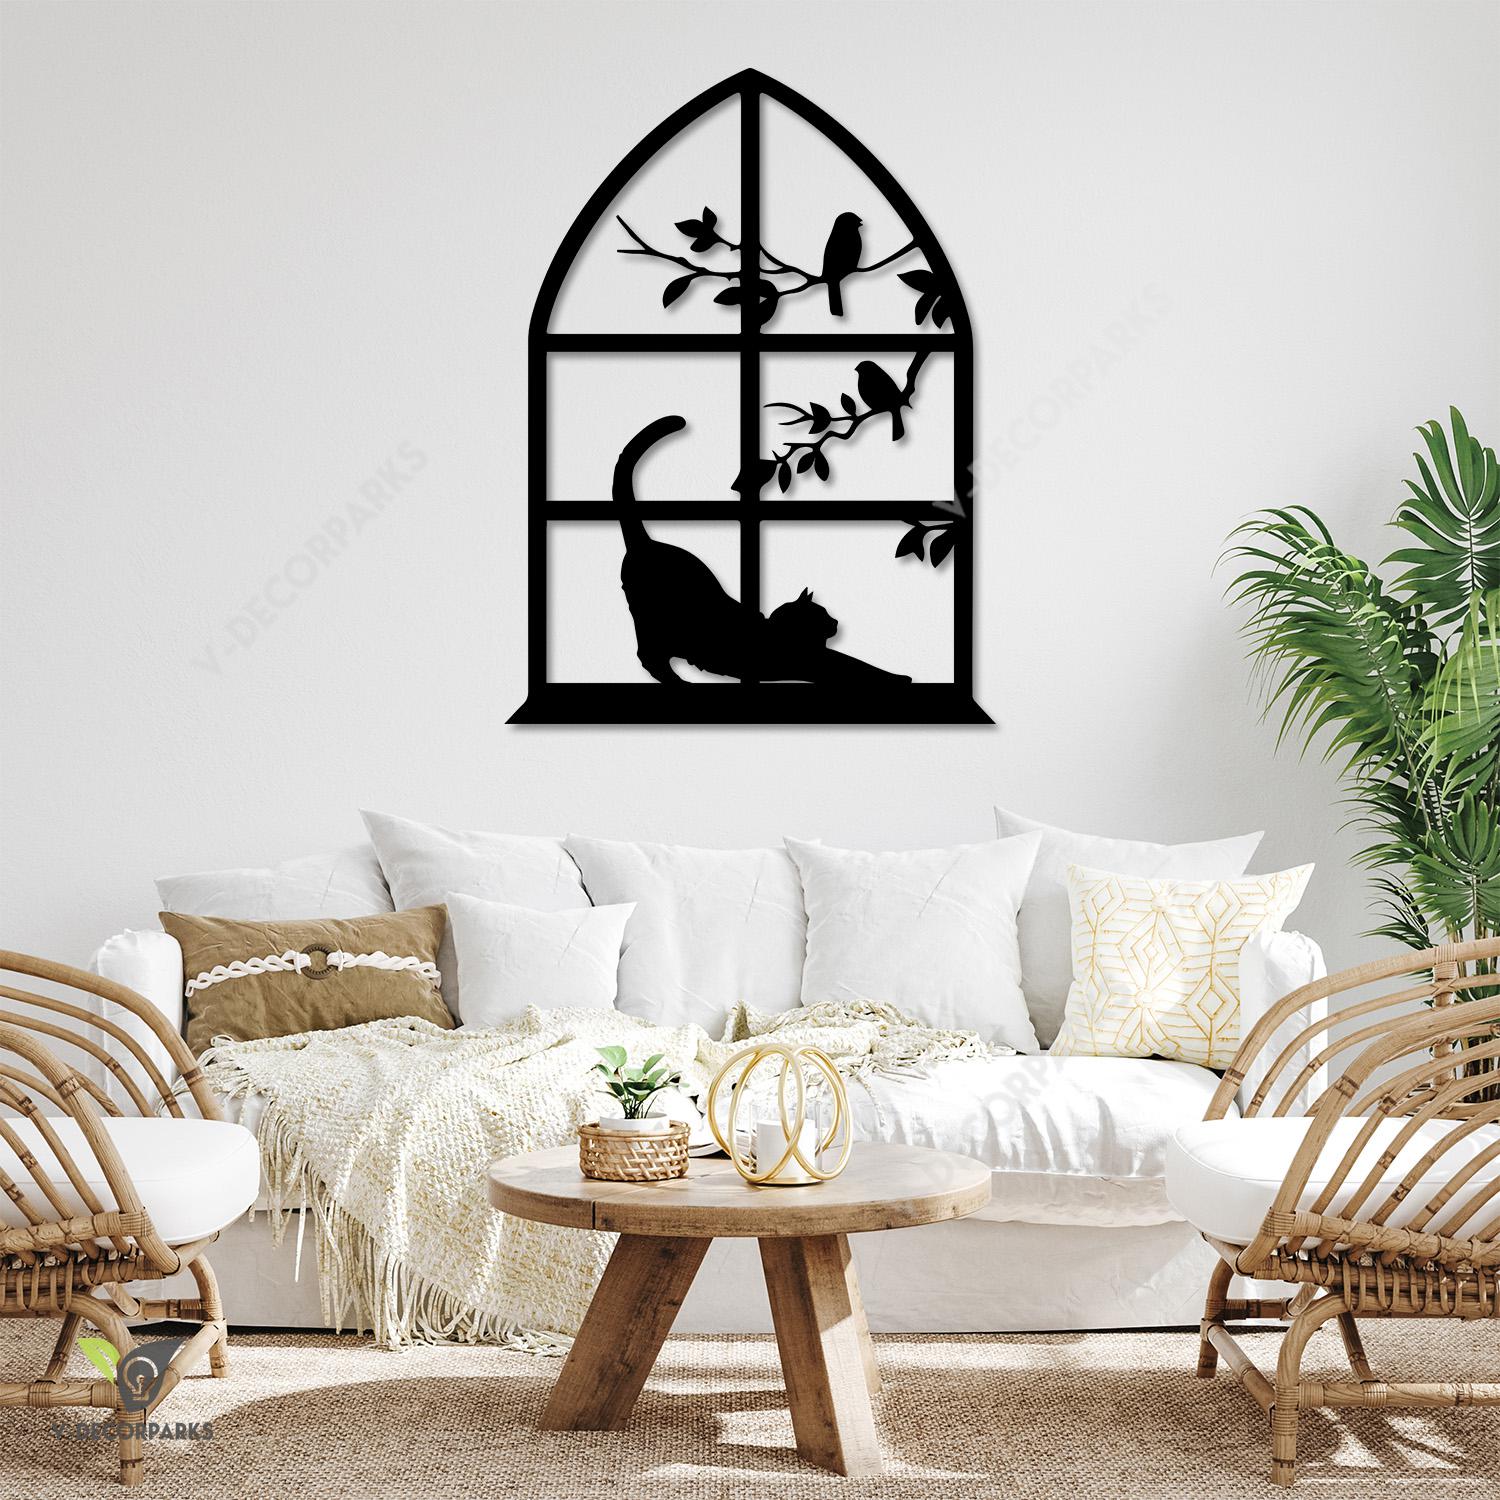 Cat On Window Metal Wall Decoration, Cat, Window And Birds Modern Wall Hanging